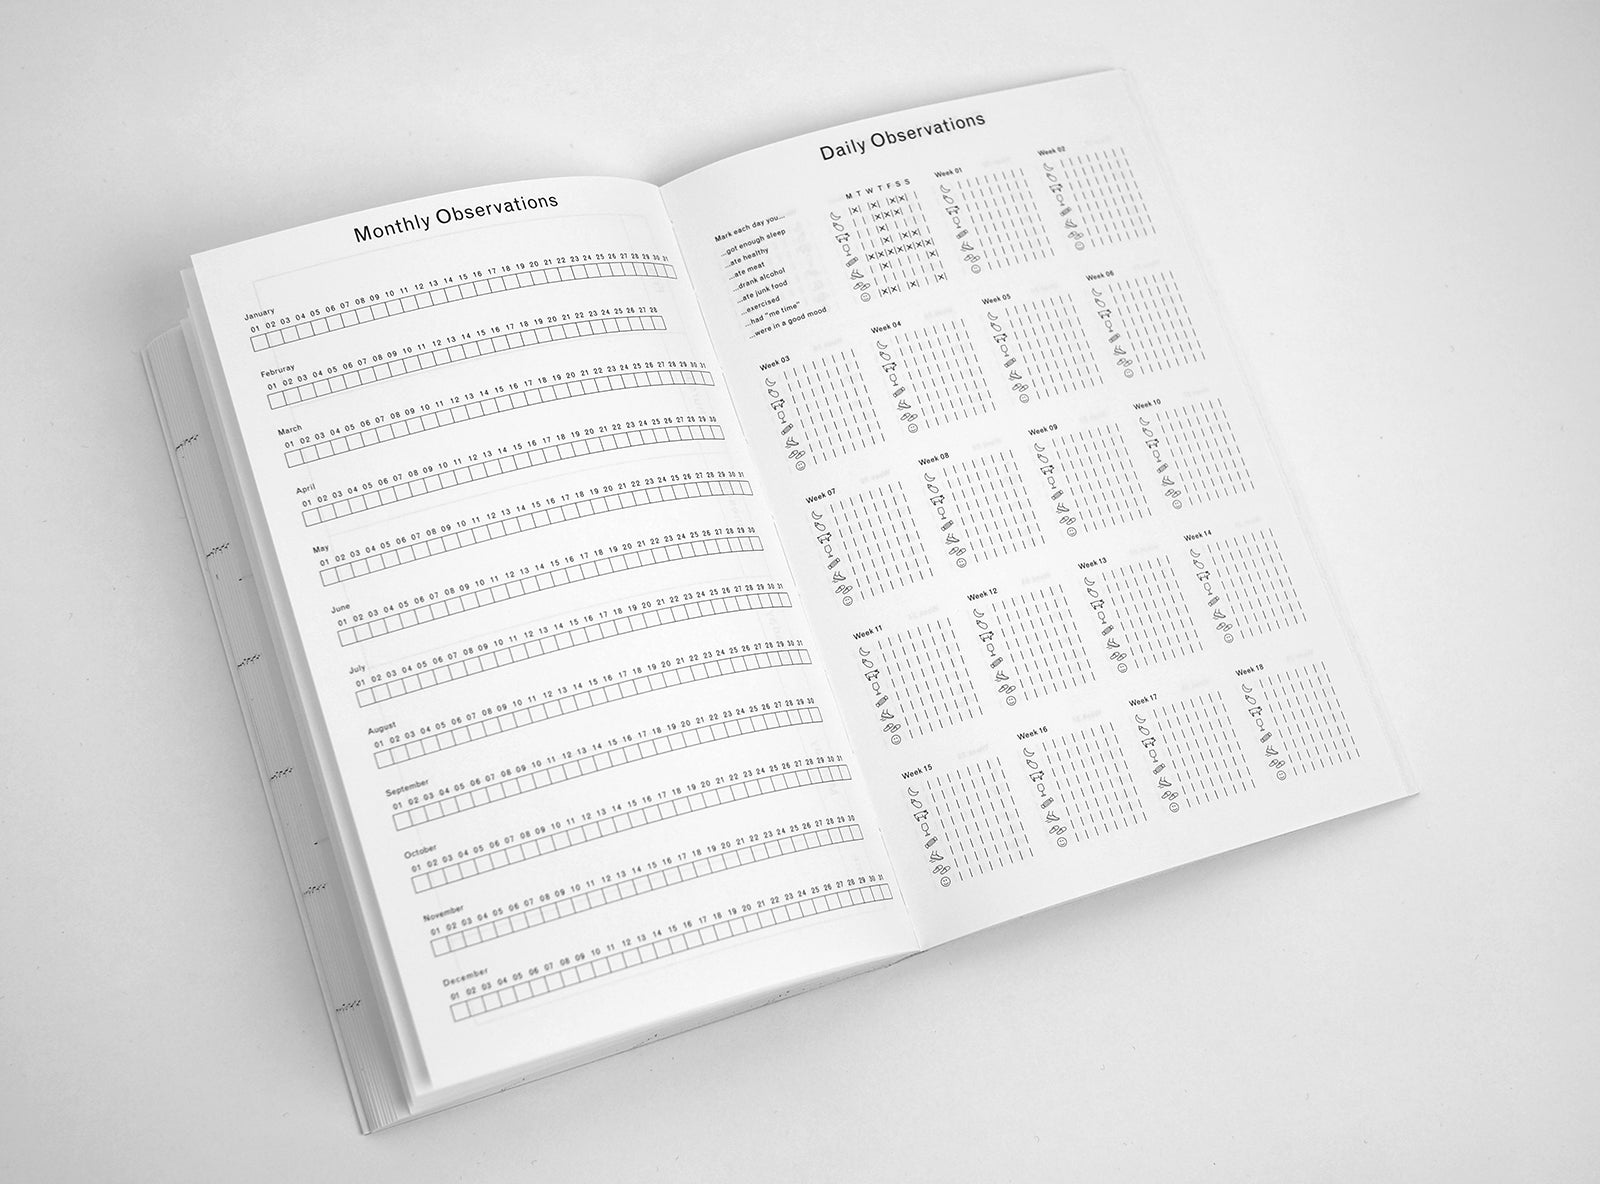 Spread from our 2019 planner showing a monthly observations table and a daily observations.